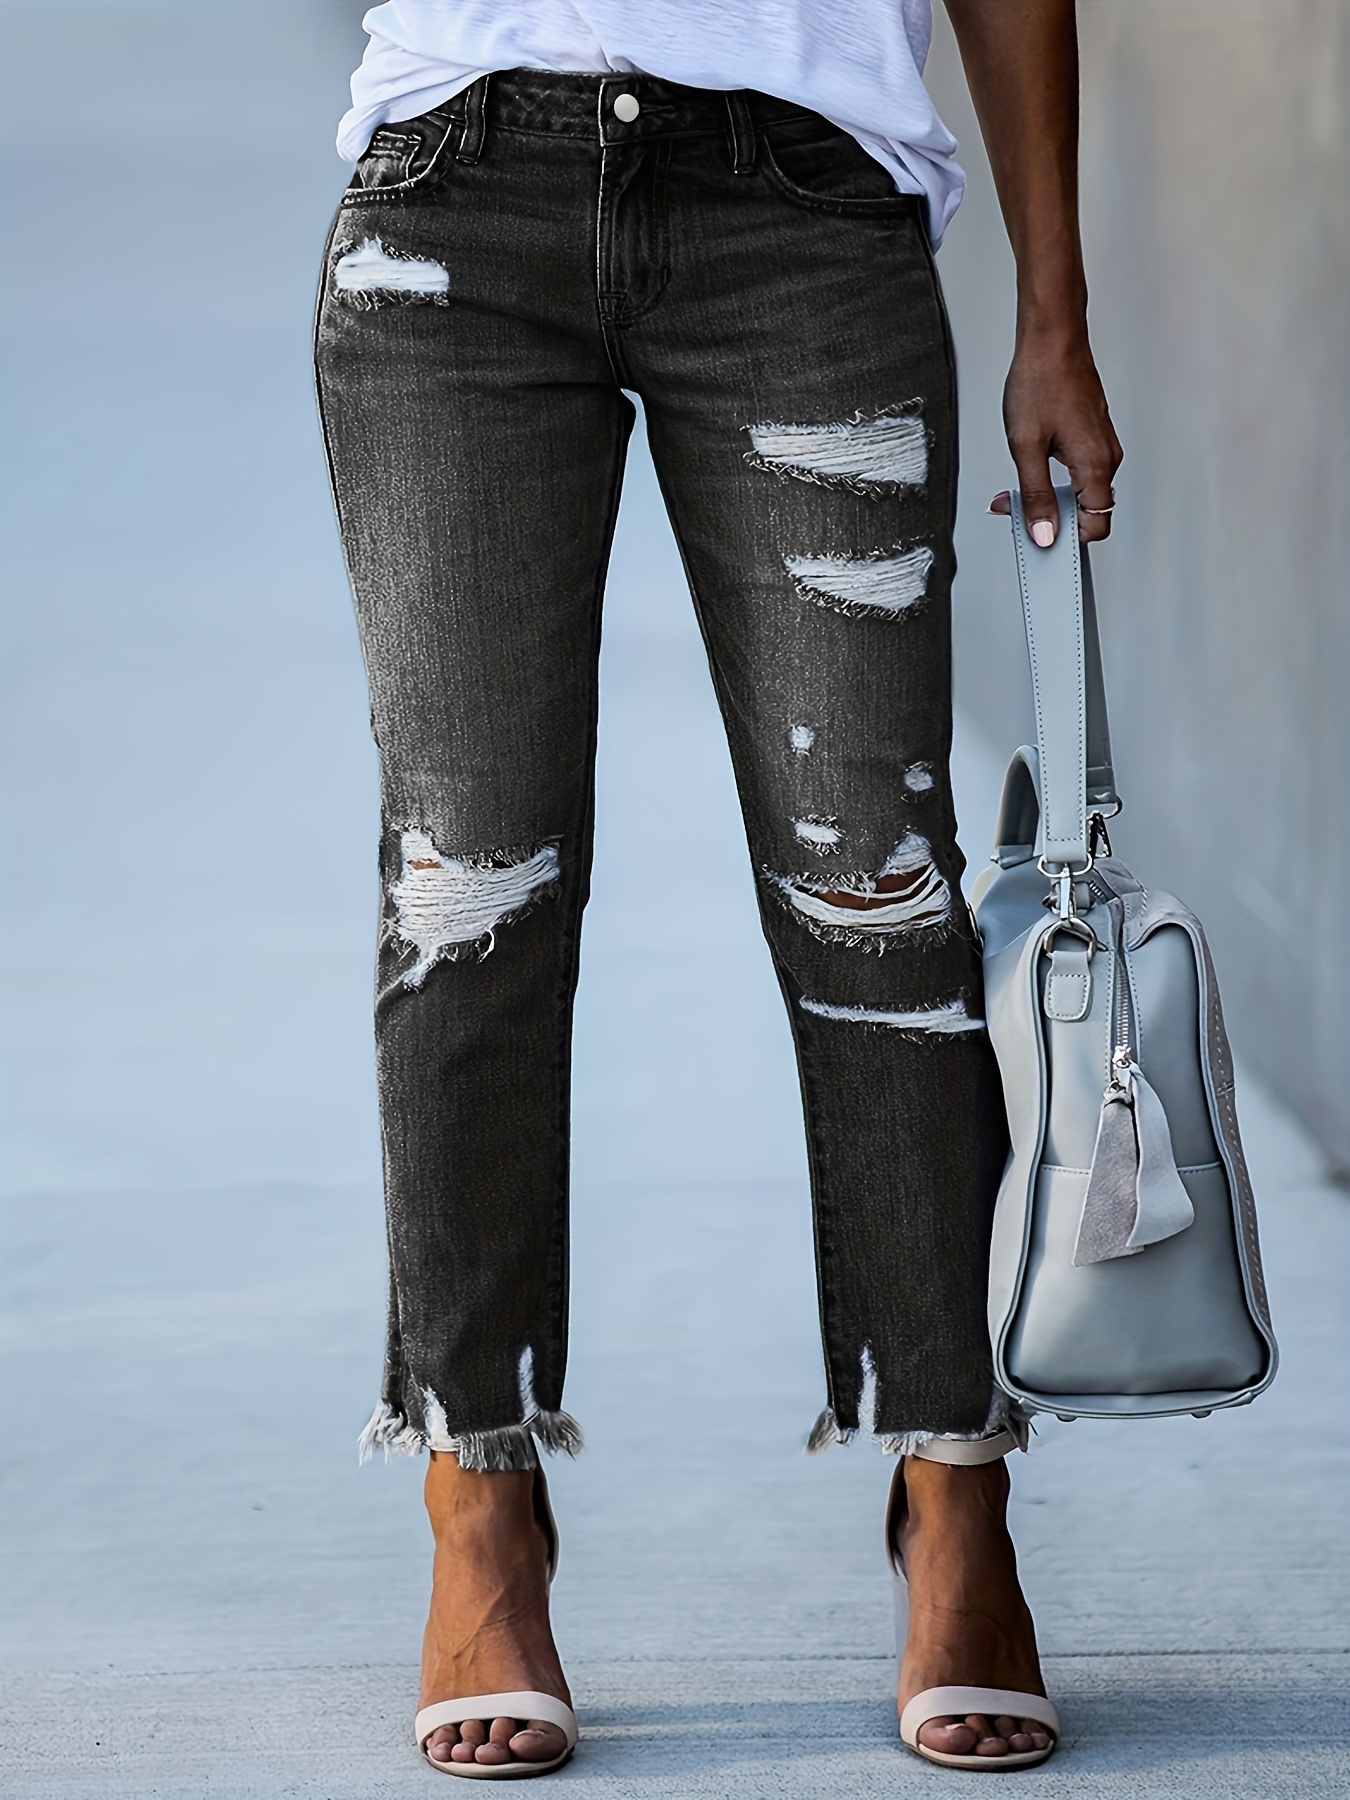 Black Ripped Holes Skinny Jeans, Distressed Slim Fit Mid-Stretch Tight  Jeans, Women's Denim Jeans & Clothing